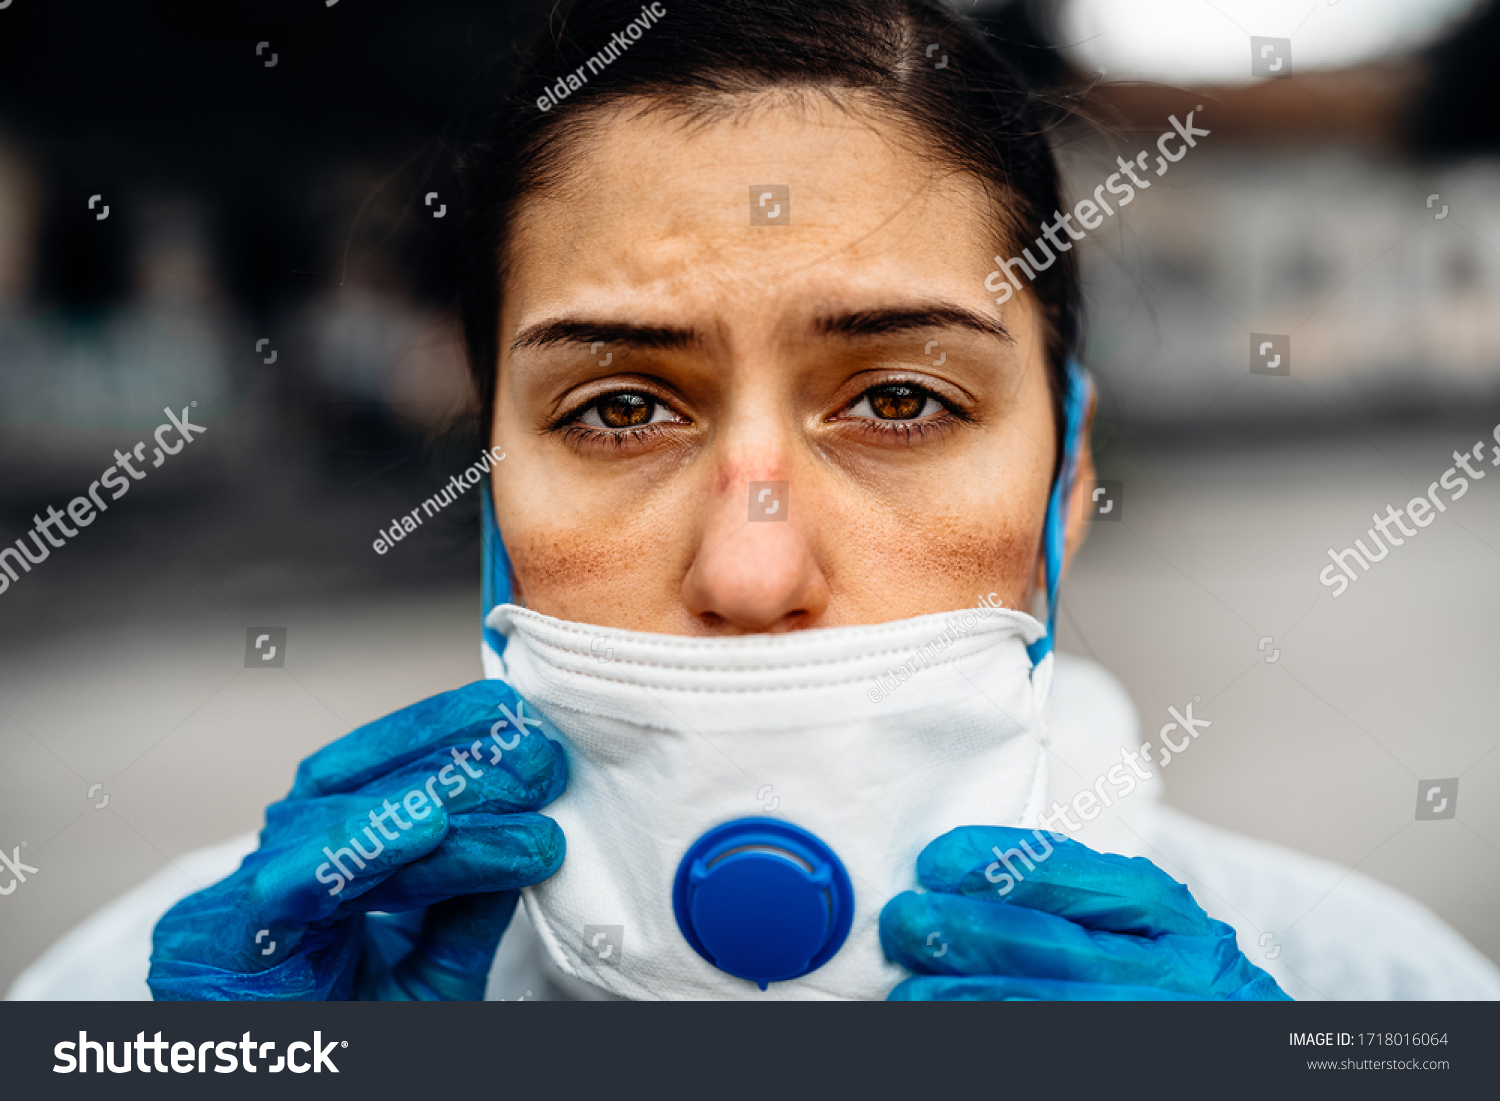 Exhausted doctor/nurse wearing coronavirus protective gear N95 mask uniform.Coronavirus Covid-19 outbreak.Mental stress of frontline worker.Face scars.Mask shortage.Overworked healthcare professional #1718016064